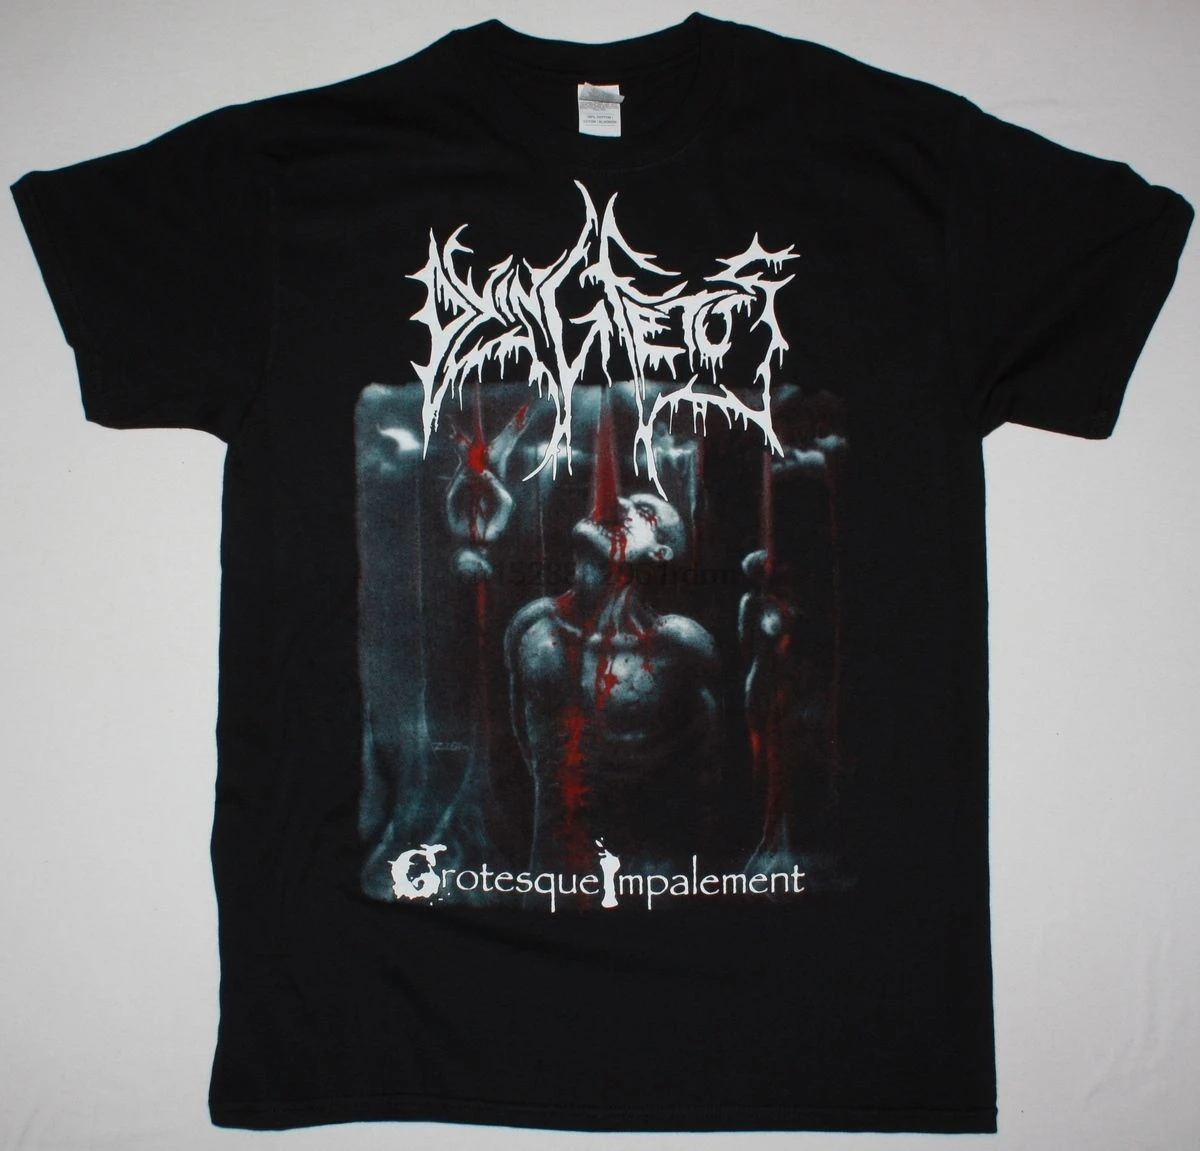 

DYING FETUS GROTESQUE IMPALEMENT GRINDCORE NILE SUFFOCATION NEW BLACK T-SHIRT 2019 fashion t shirt 100% cotton tee shirt